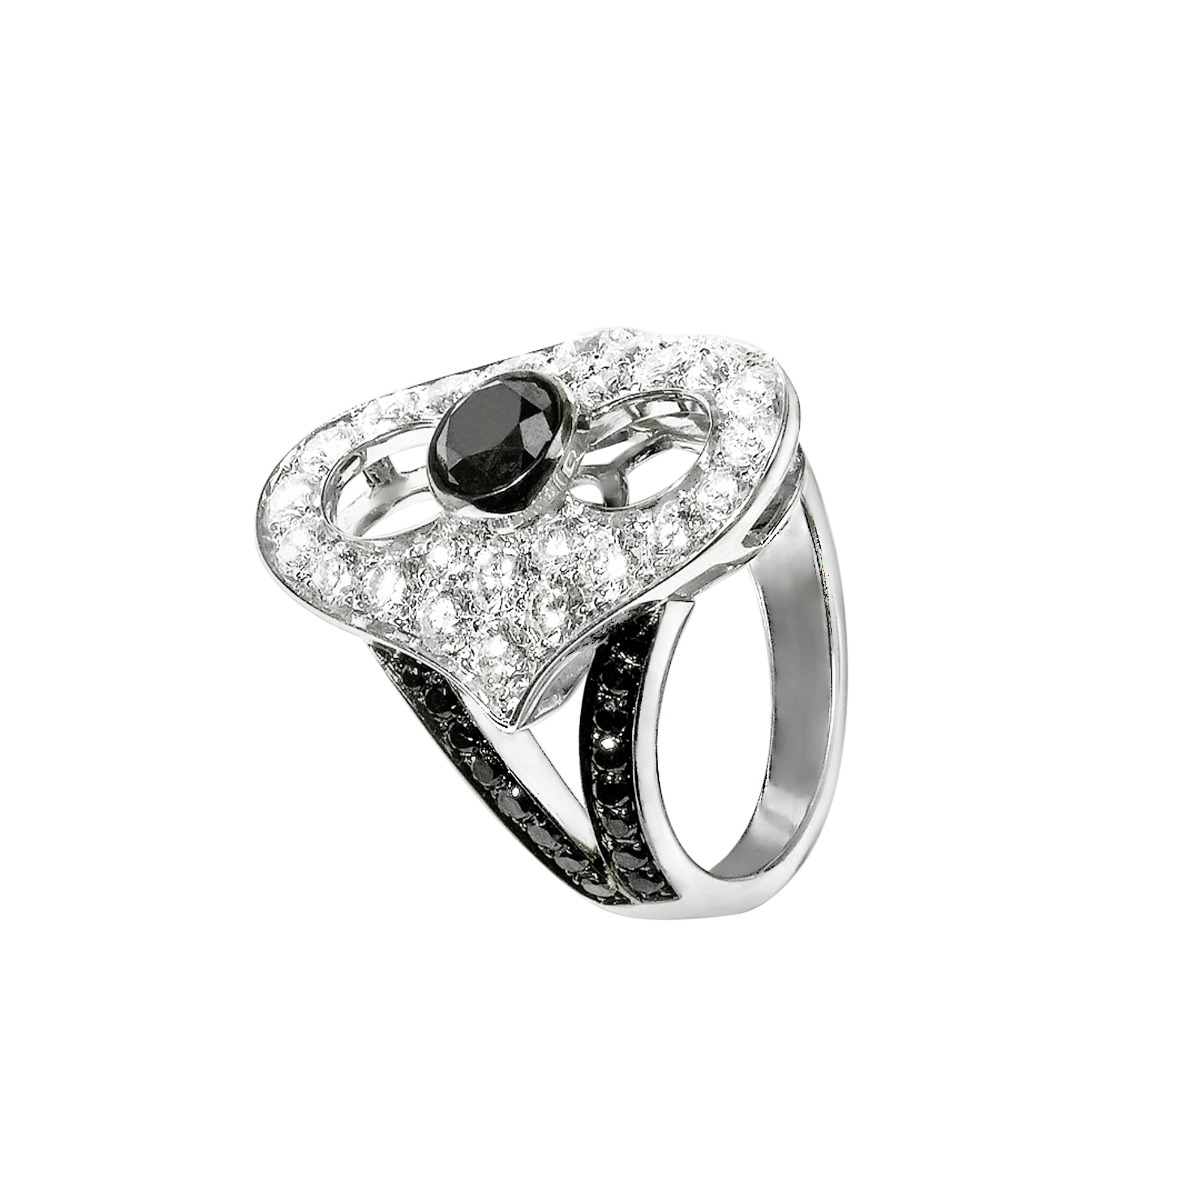 Indian Style 18 K White Gold Ring with White and Black Diamonds 